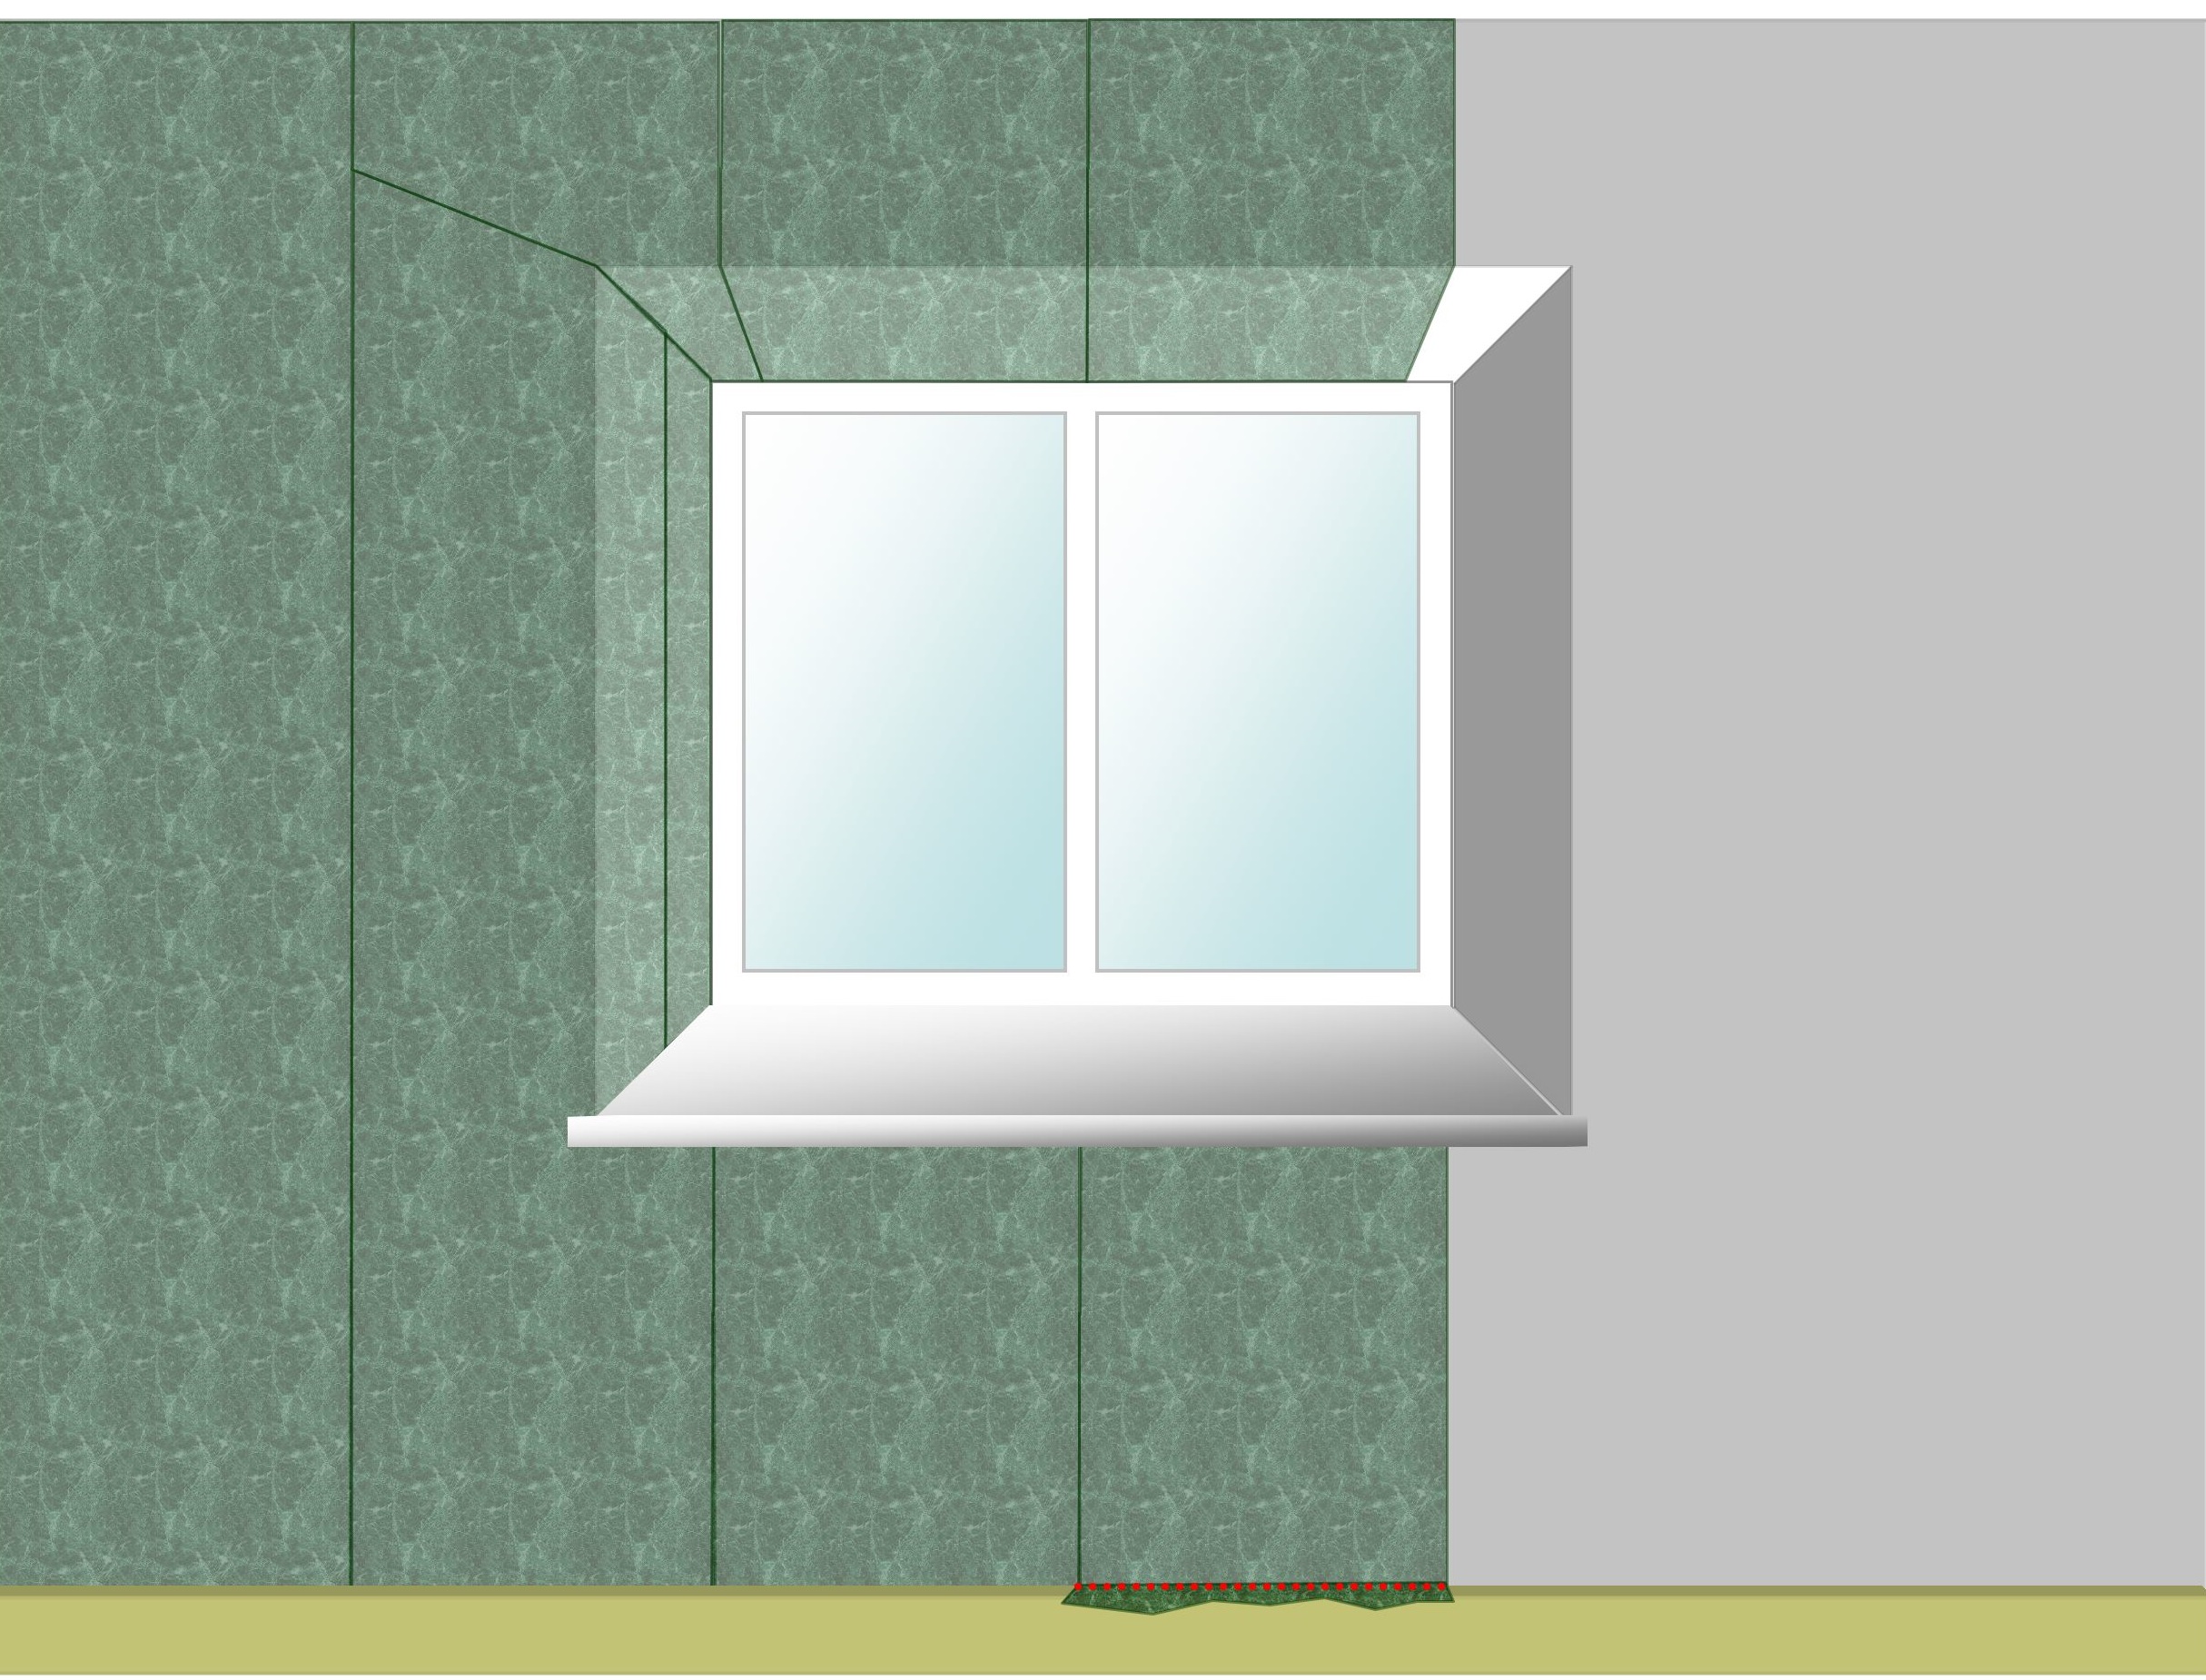 Wallpapering Around A Window